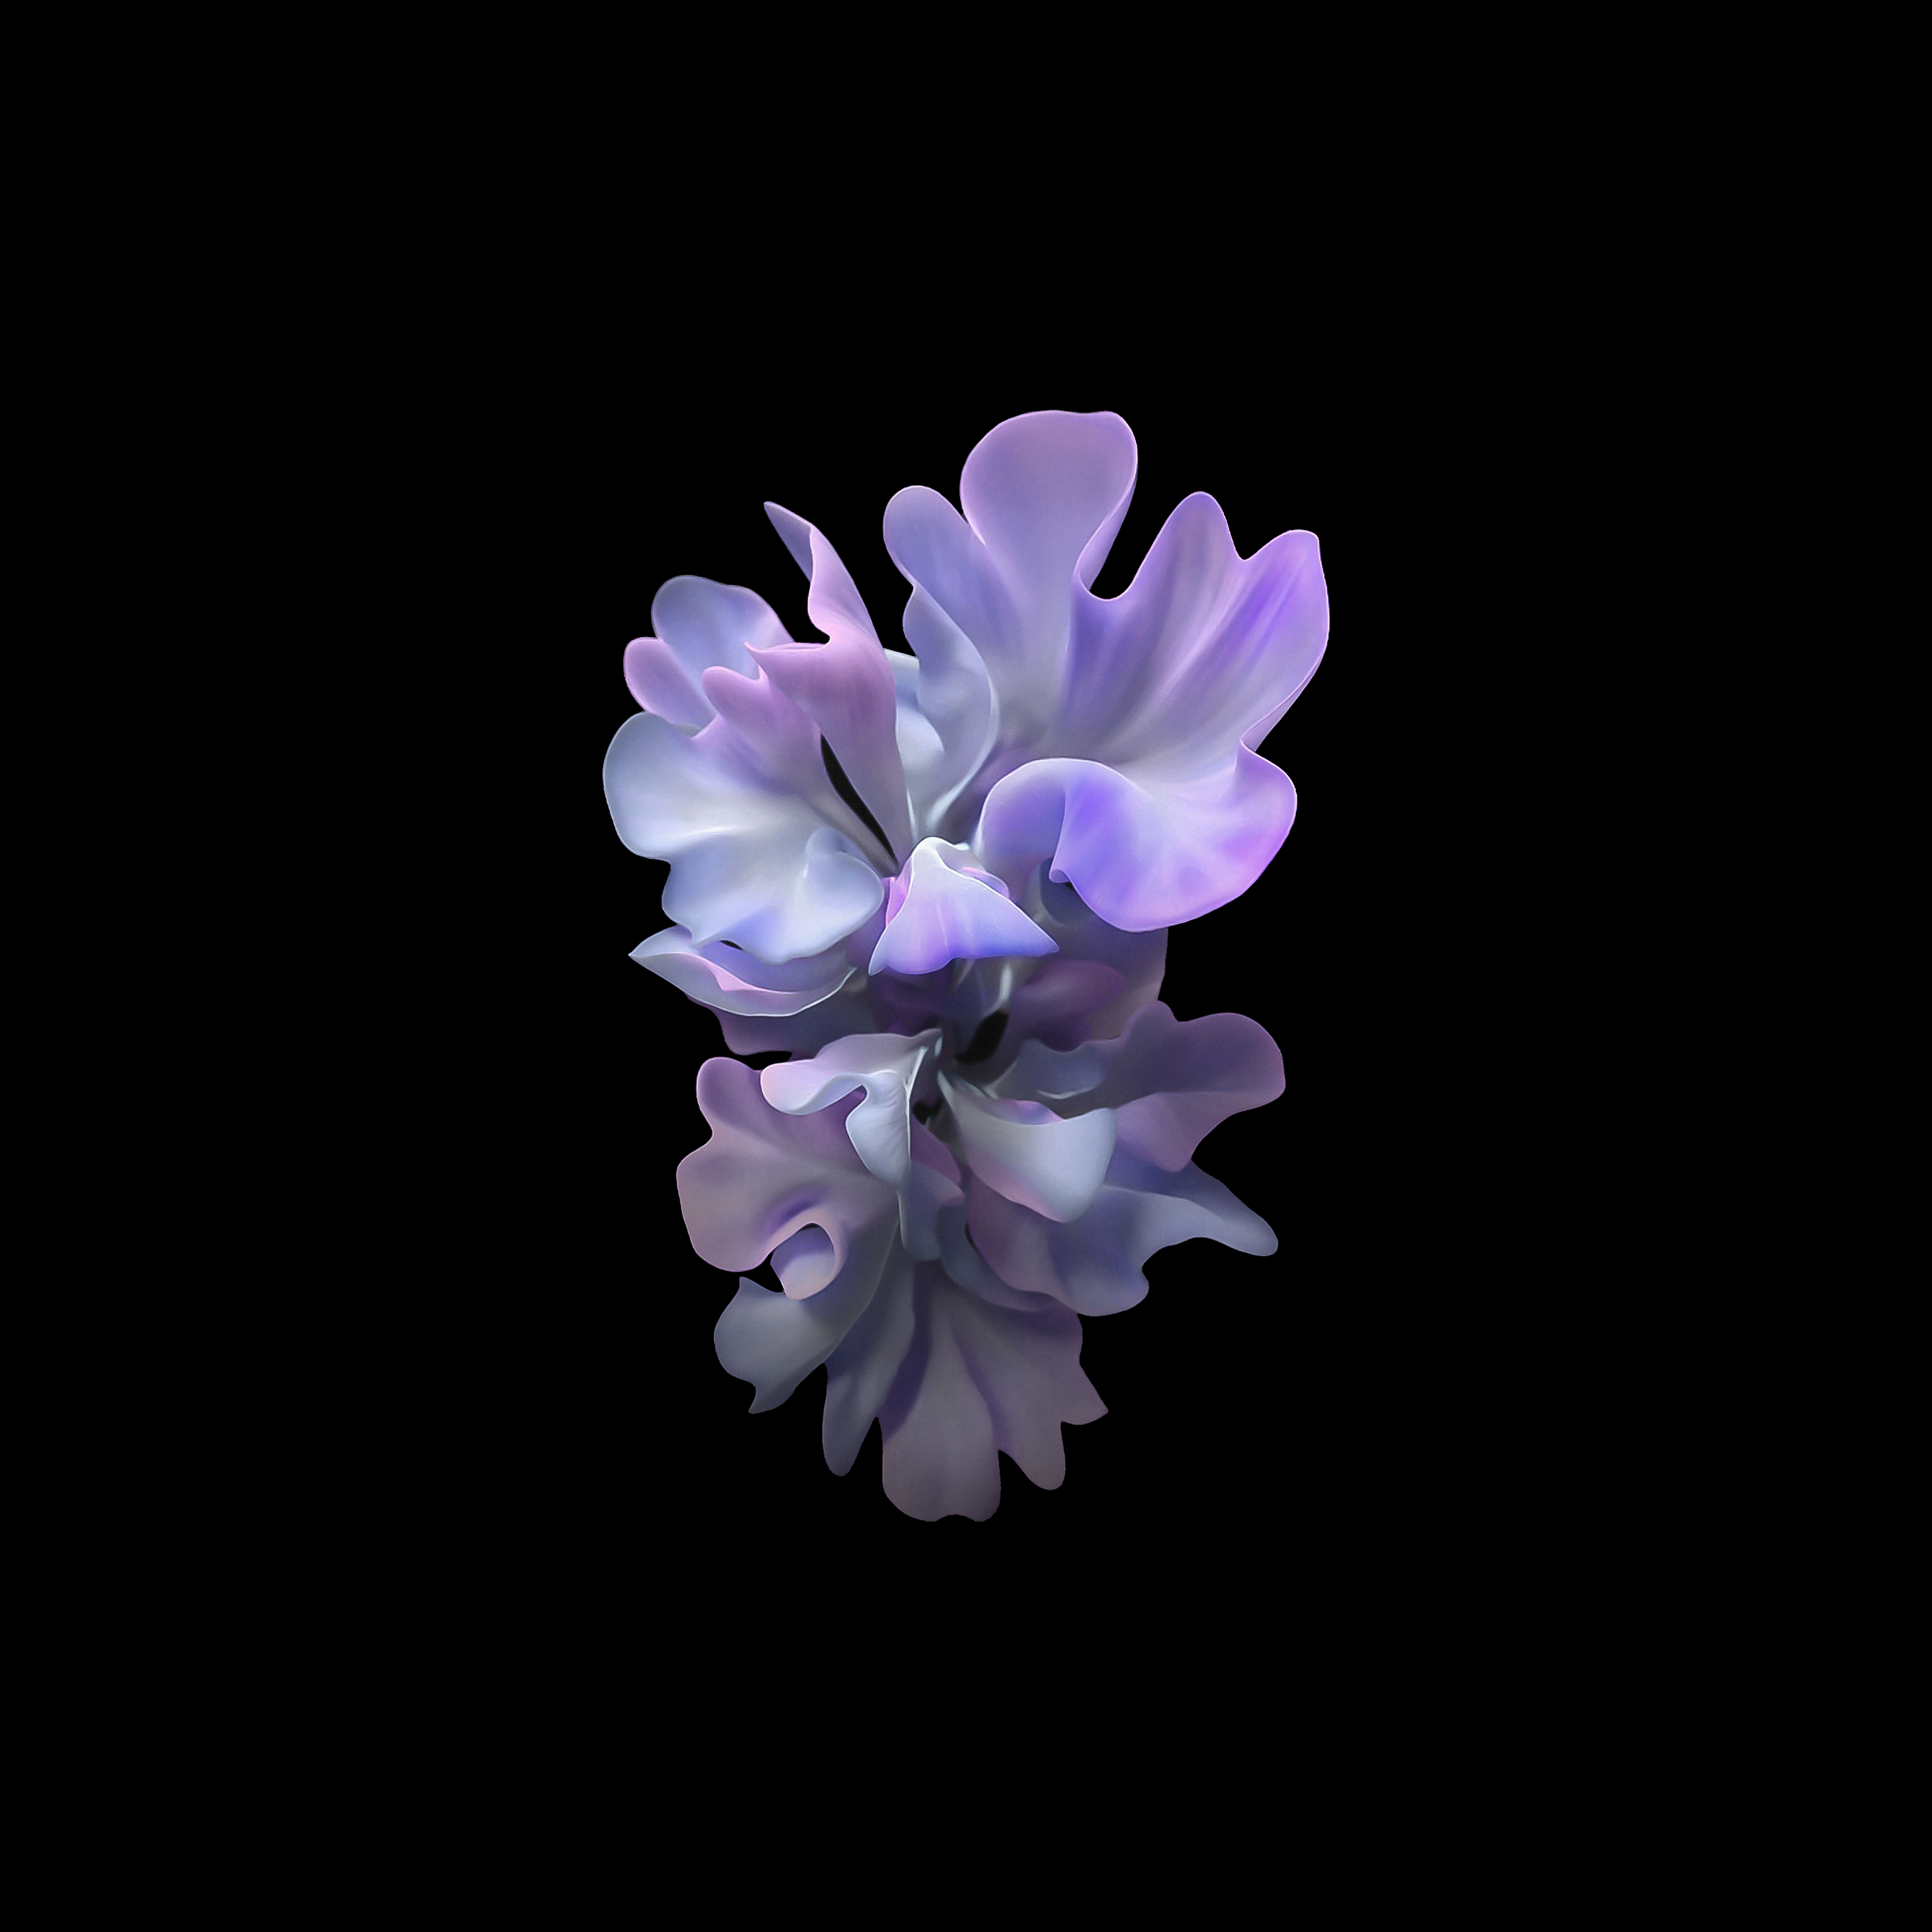 Download Galaxy Z Flip Wallpapers And See Your Home Screen Bloom